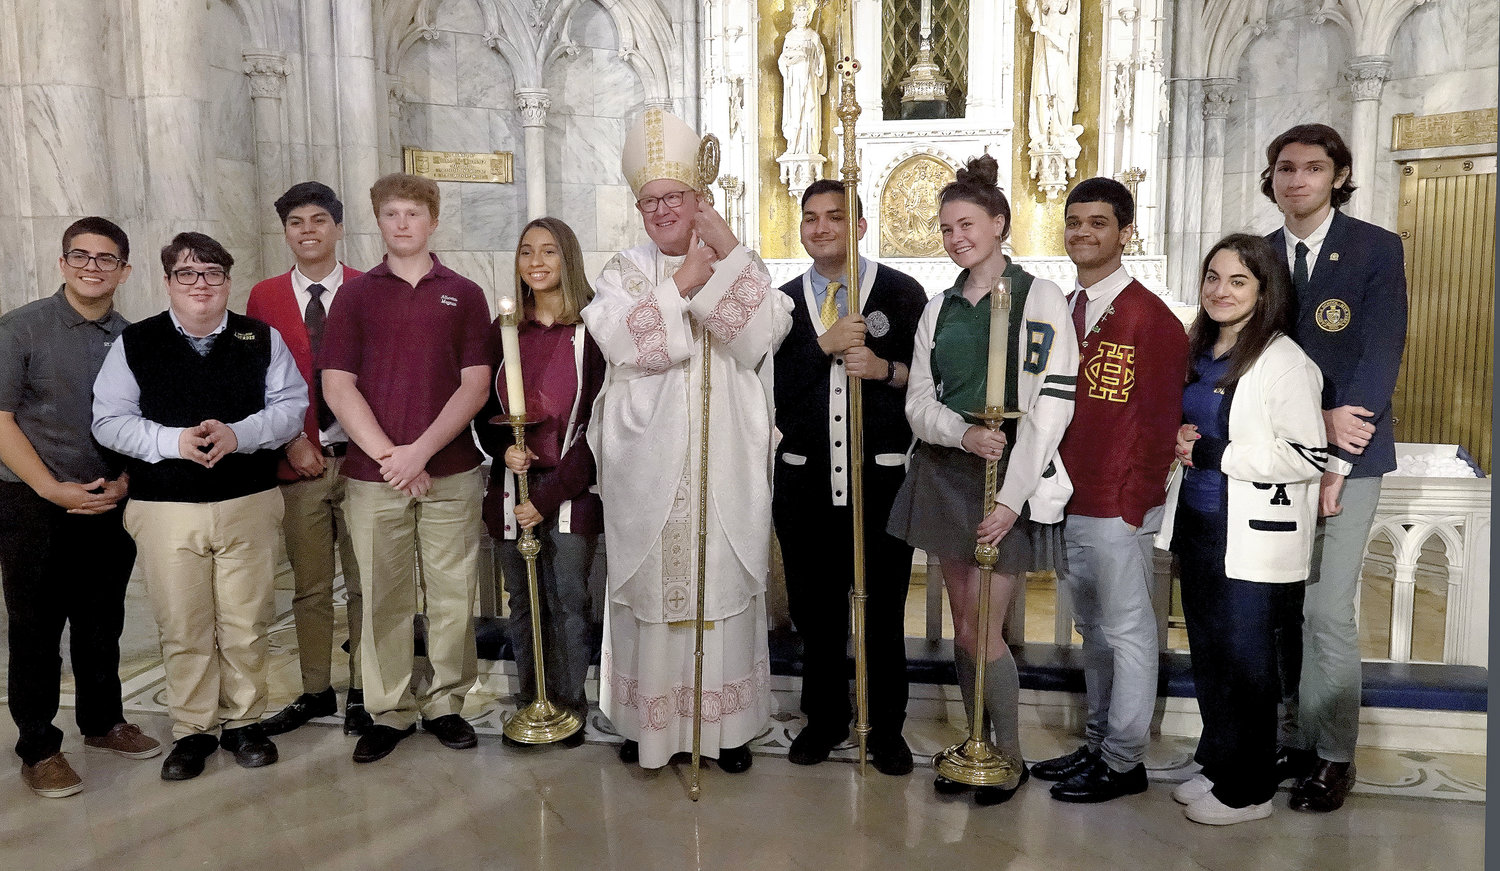 Cardinal Dolan greets seniors from Catholic high schools in the archdiocese who served at the Mass he offered for the Class of 2022 May 18 at St. Patrick’s Cathedral, the second time that week he had done so.